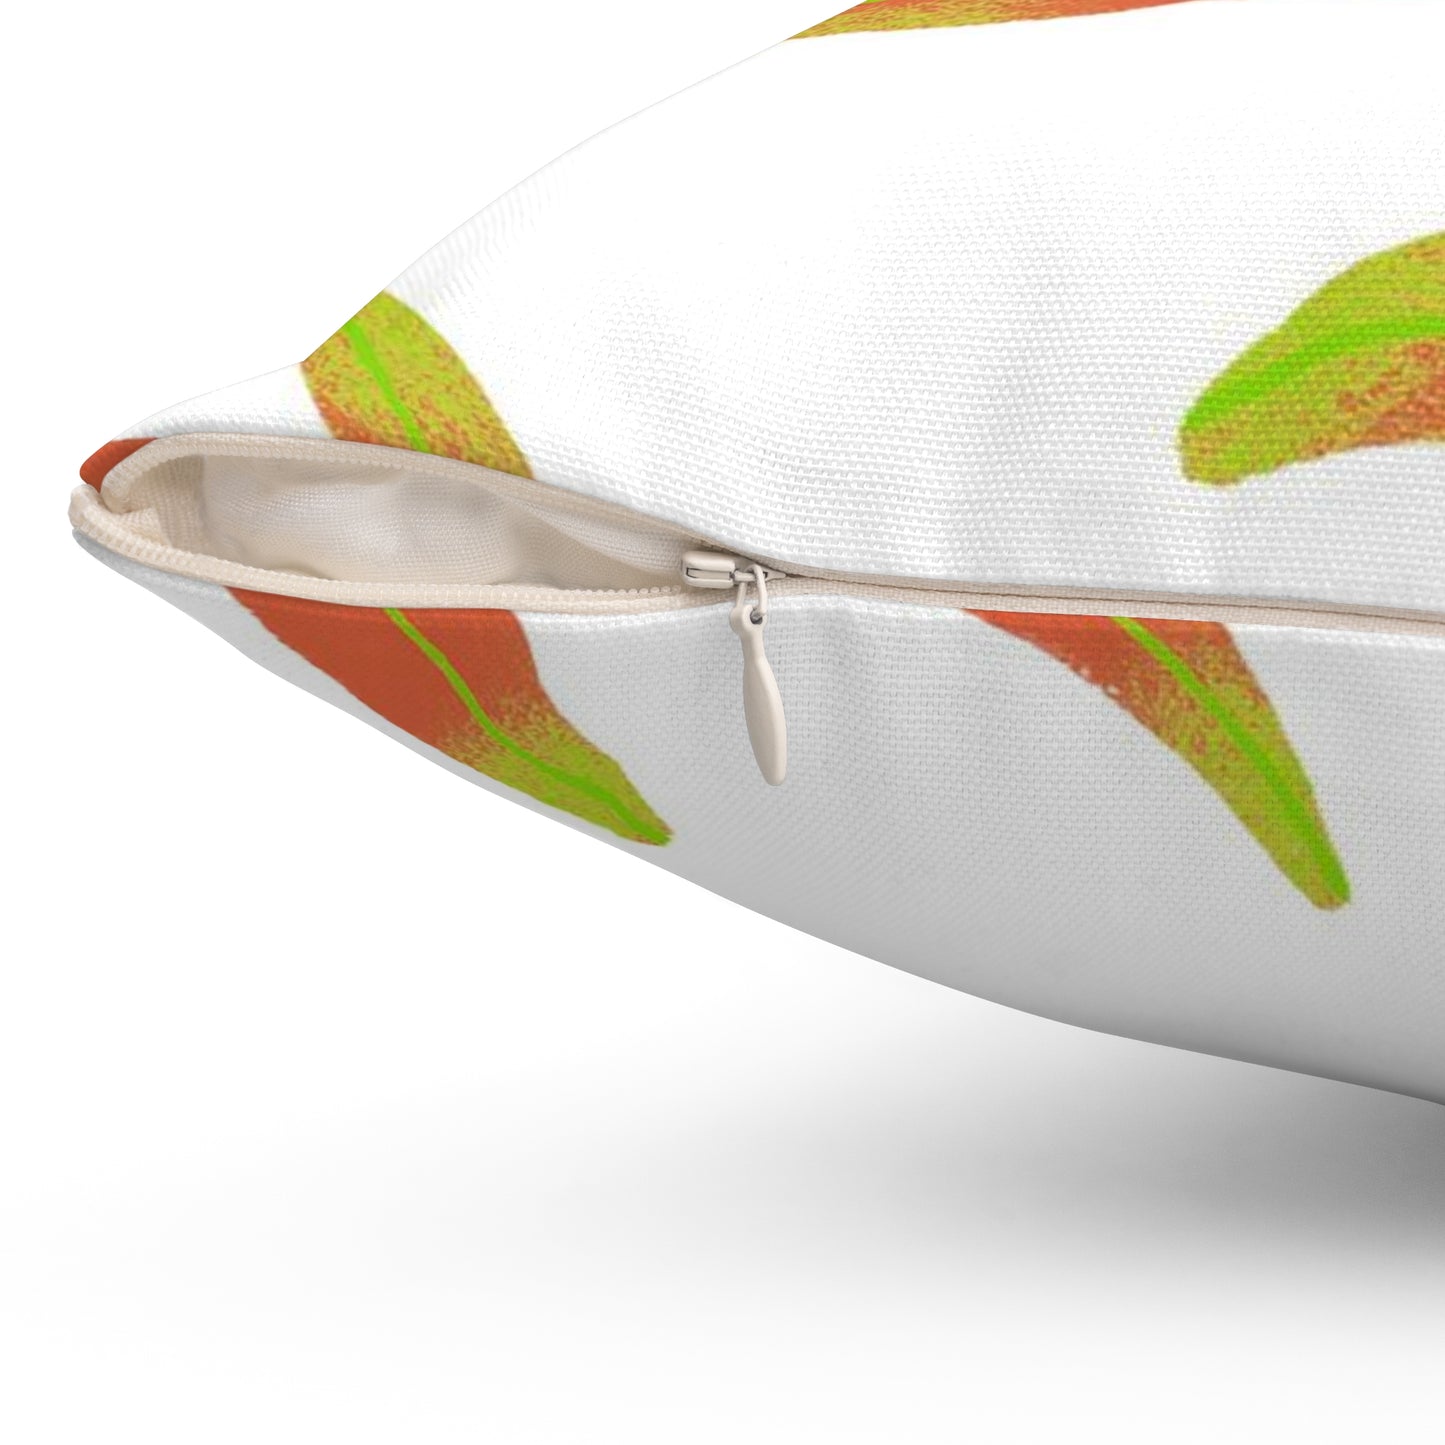 Square Pillow Cover With Pillow Insert In Rusty Leaves Pattern - White